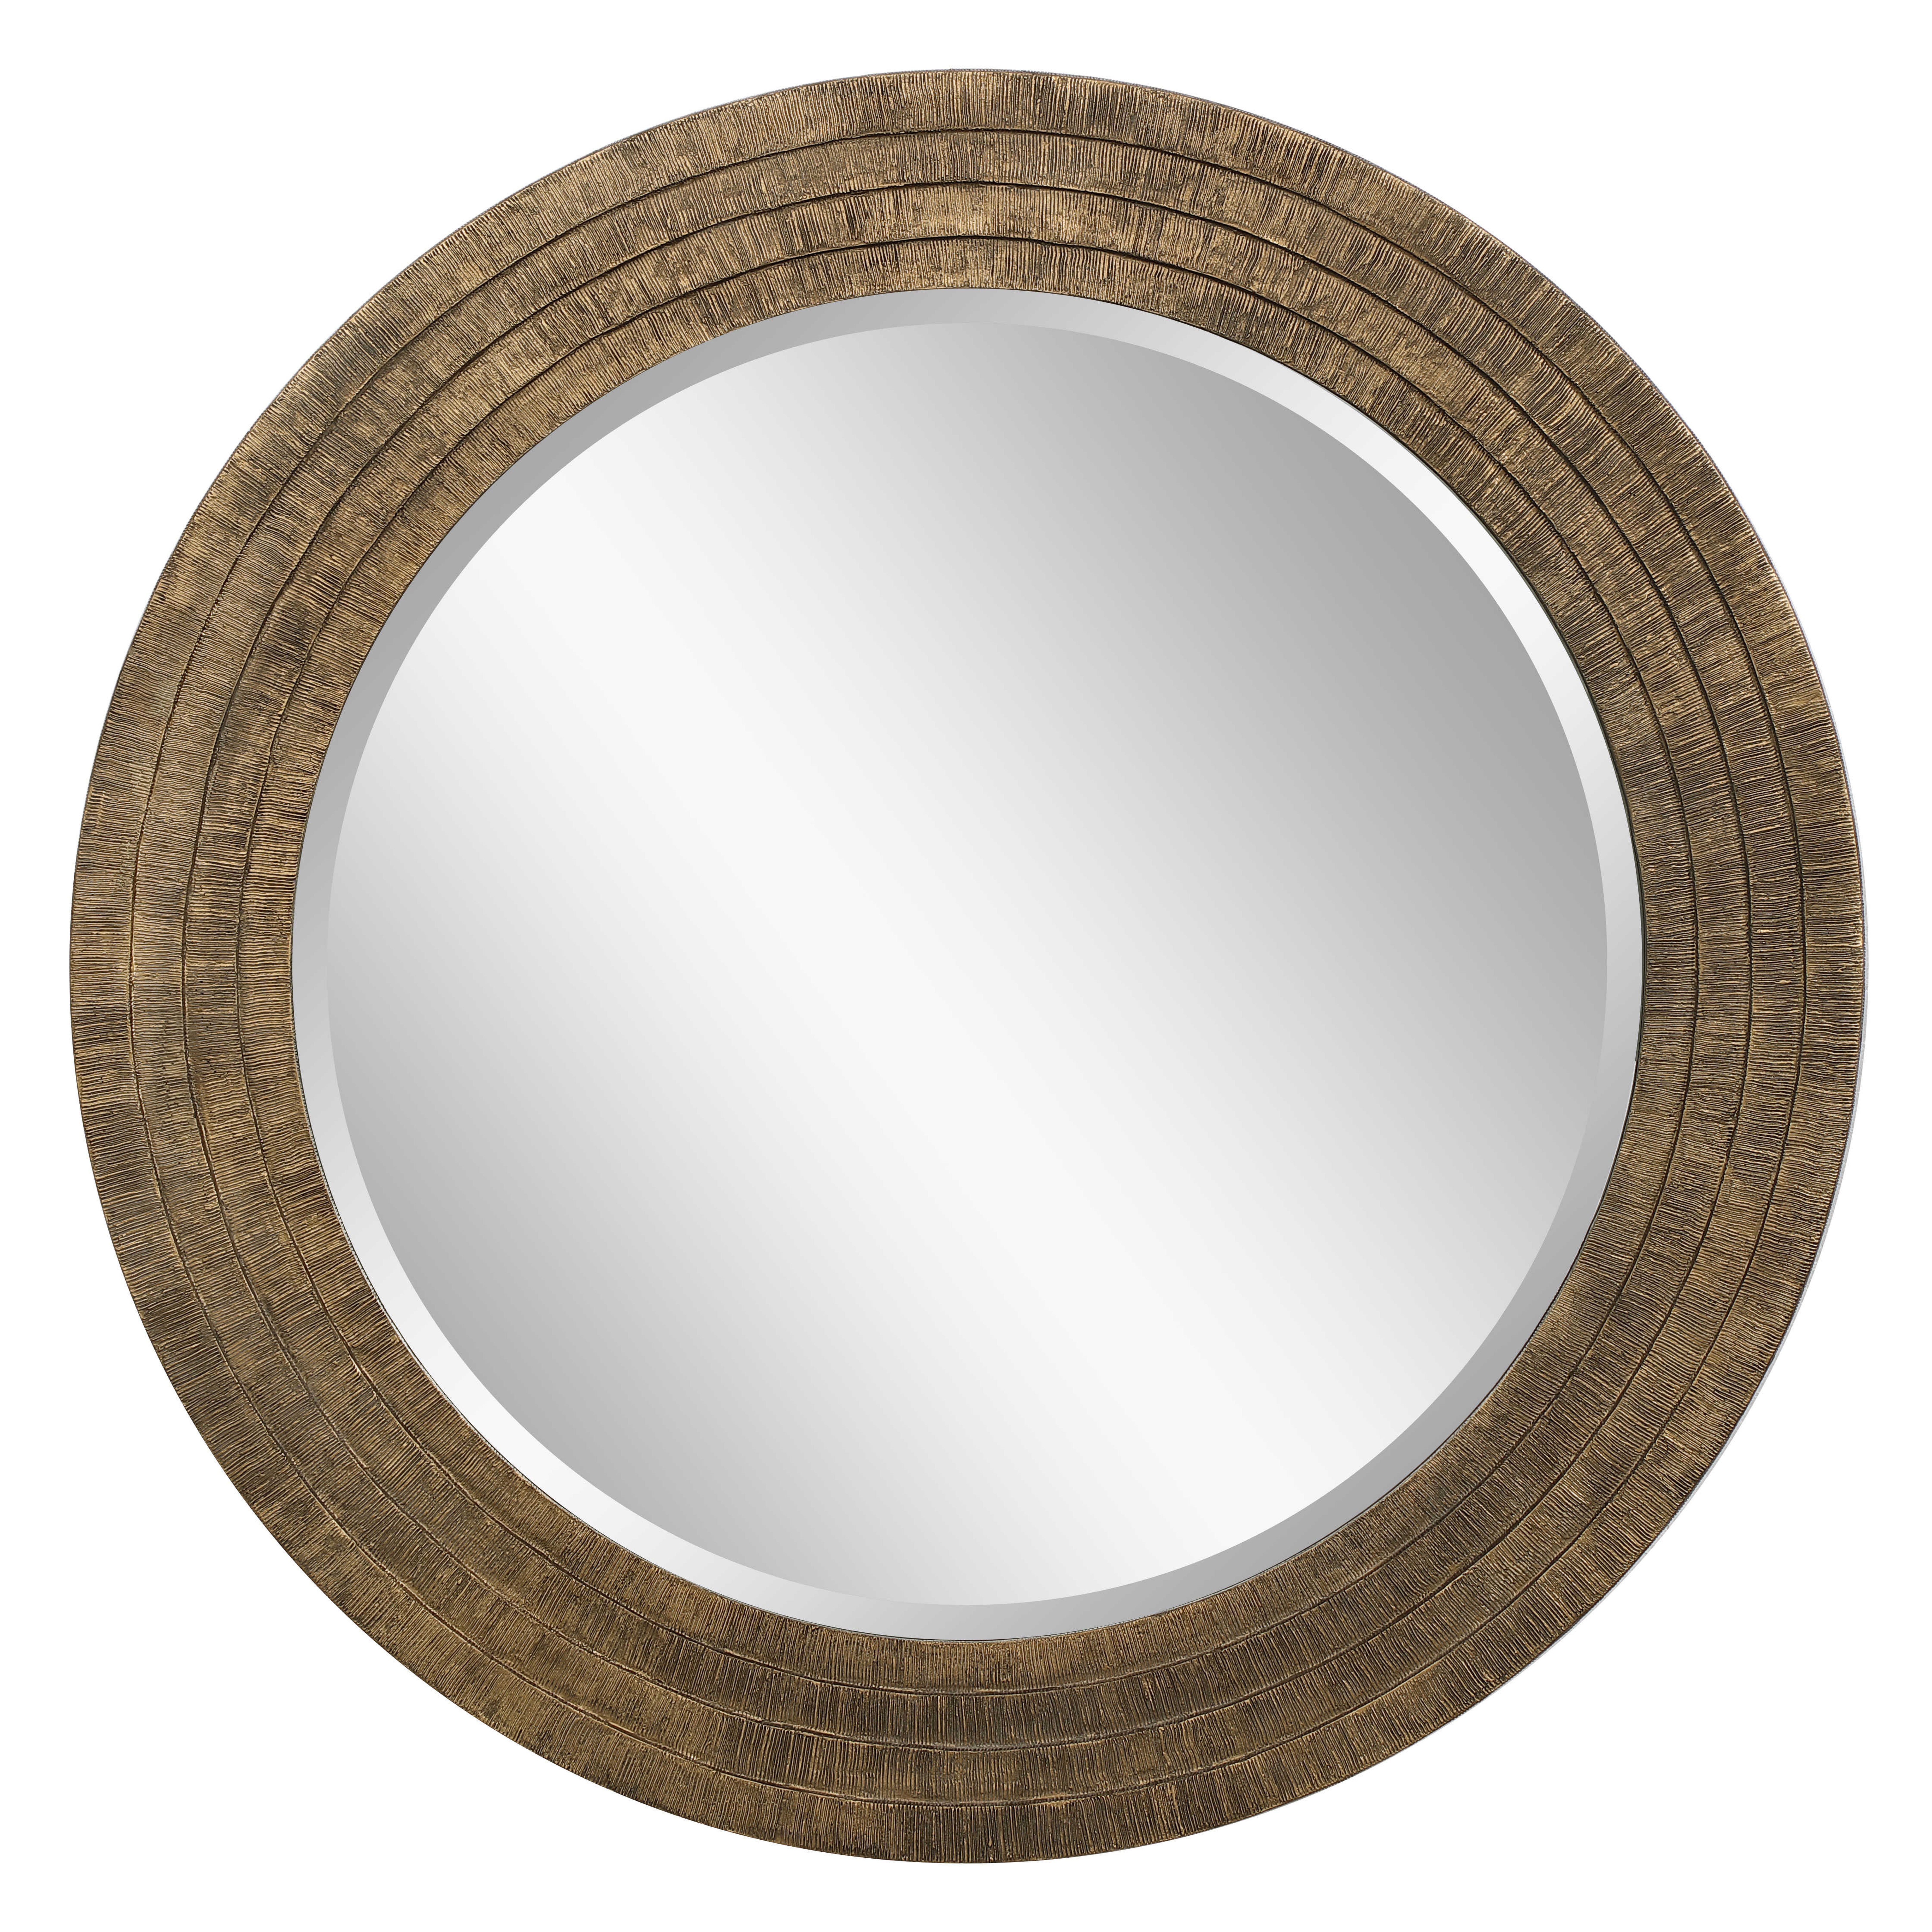 Relic Round Mirror, Aged Gold, 36" - Hudsonhill Foundry